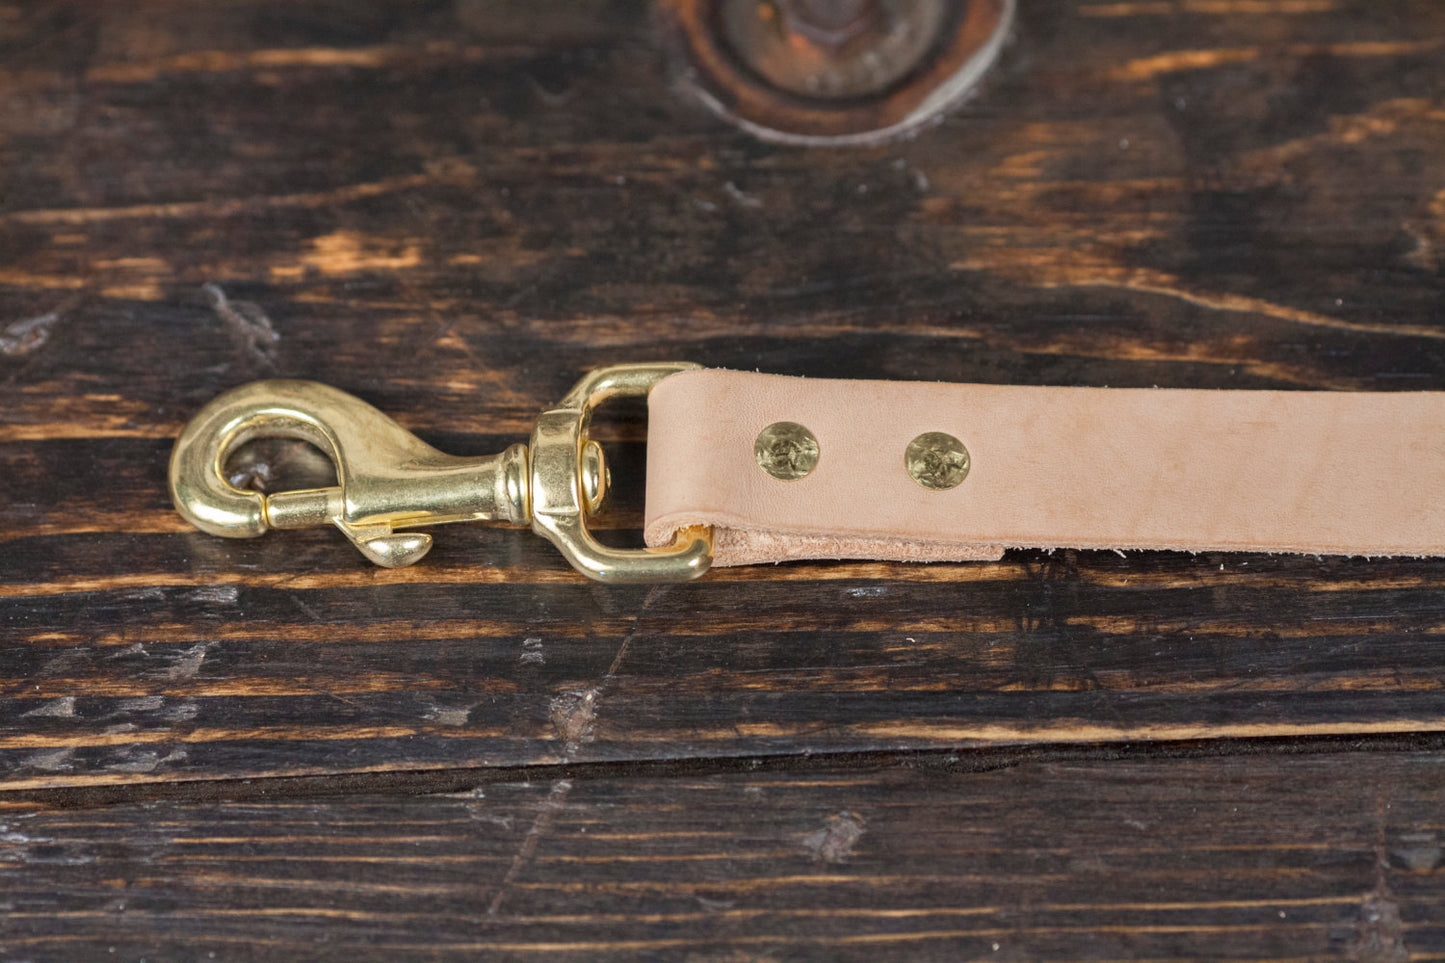 1" or 3/4" Natural Vegtan or Black CXL Leather Dog Leash 5' with Brass Hardware - Made to Order